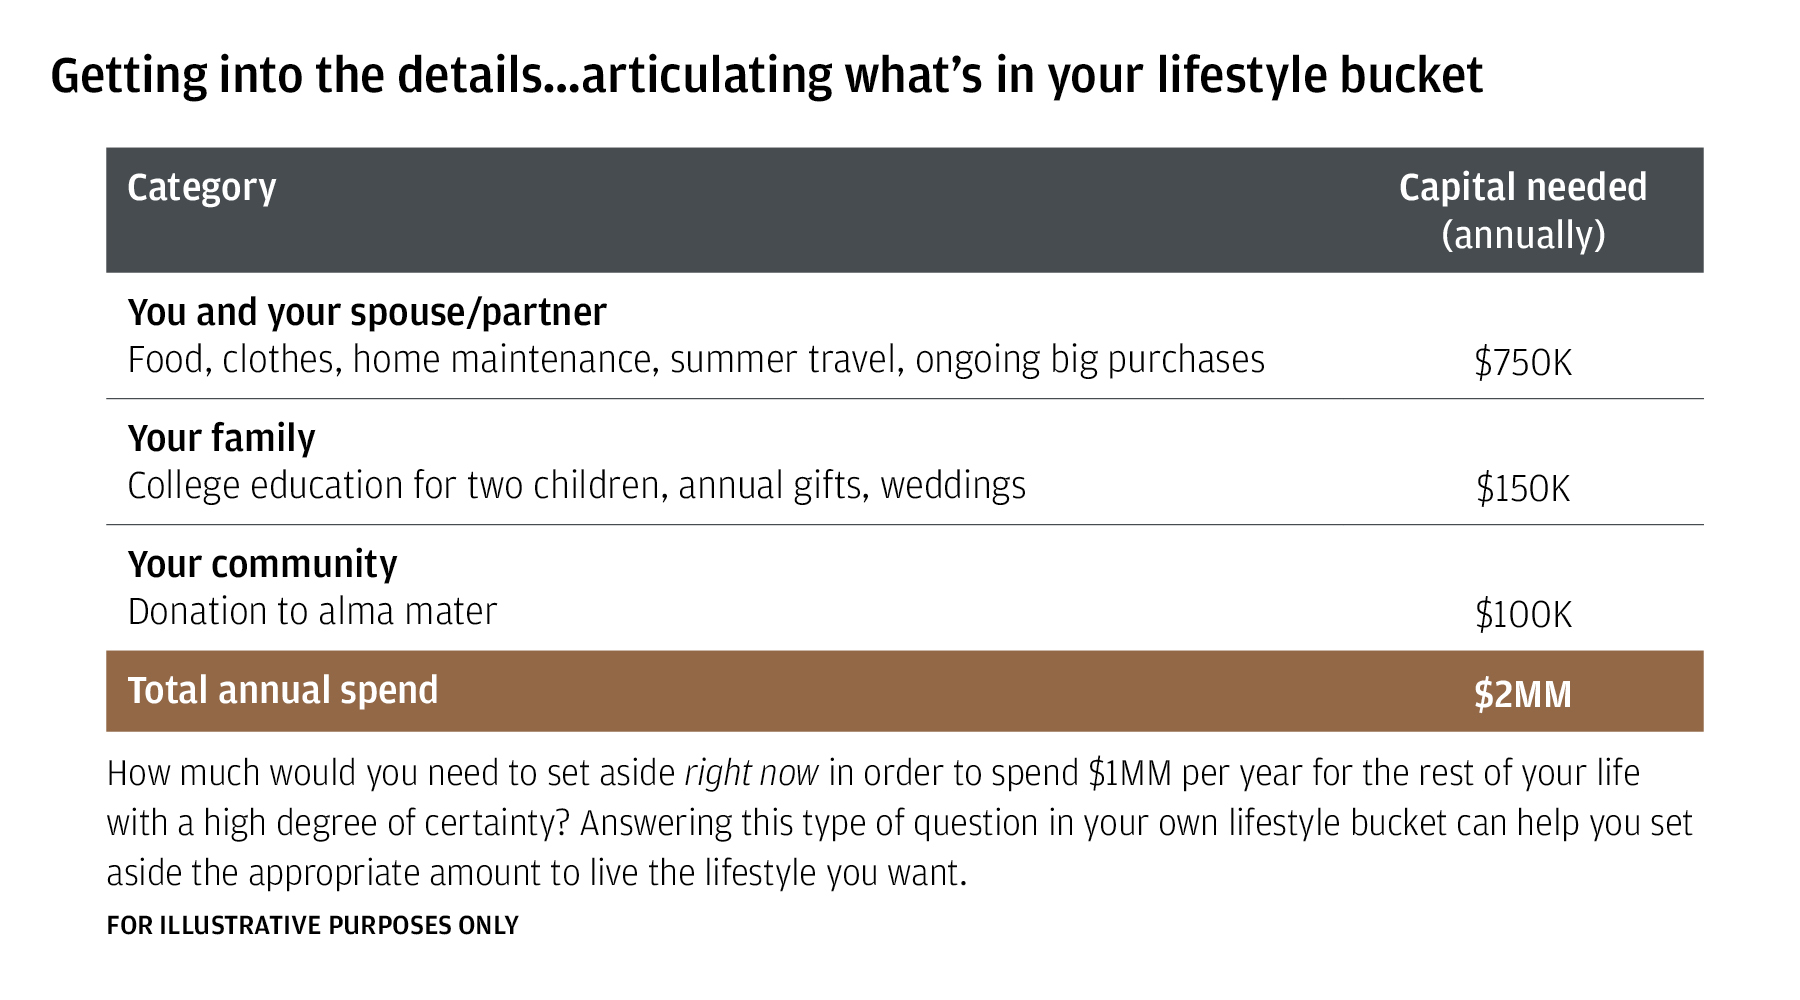 This chart provides an example to help articulate what’s in your lifestyle bucket. For instance, you can add up the capital needed (annually) for you and your spouse/partner (e.g., food, clothes), your family (e.g., college education), and your community (e.g., donation to alma mater) to calculate your total annual spend. How much do you need to set aside right now in order to spend with a high degree of certainty this amount per year for the rest of your life? 